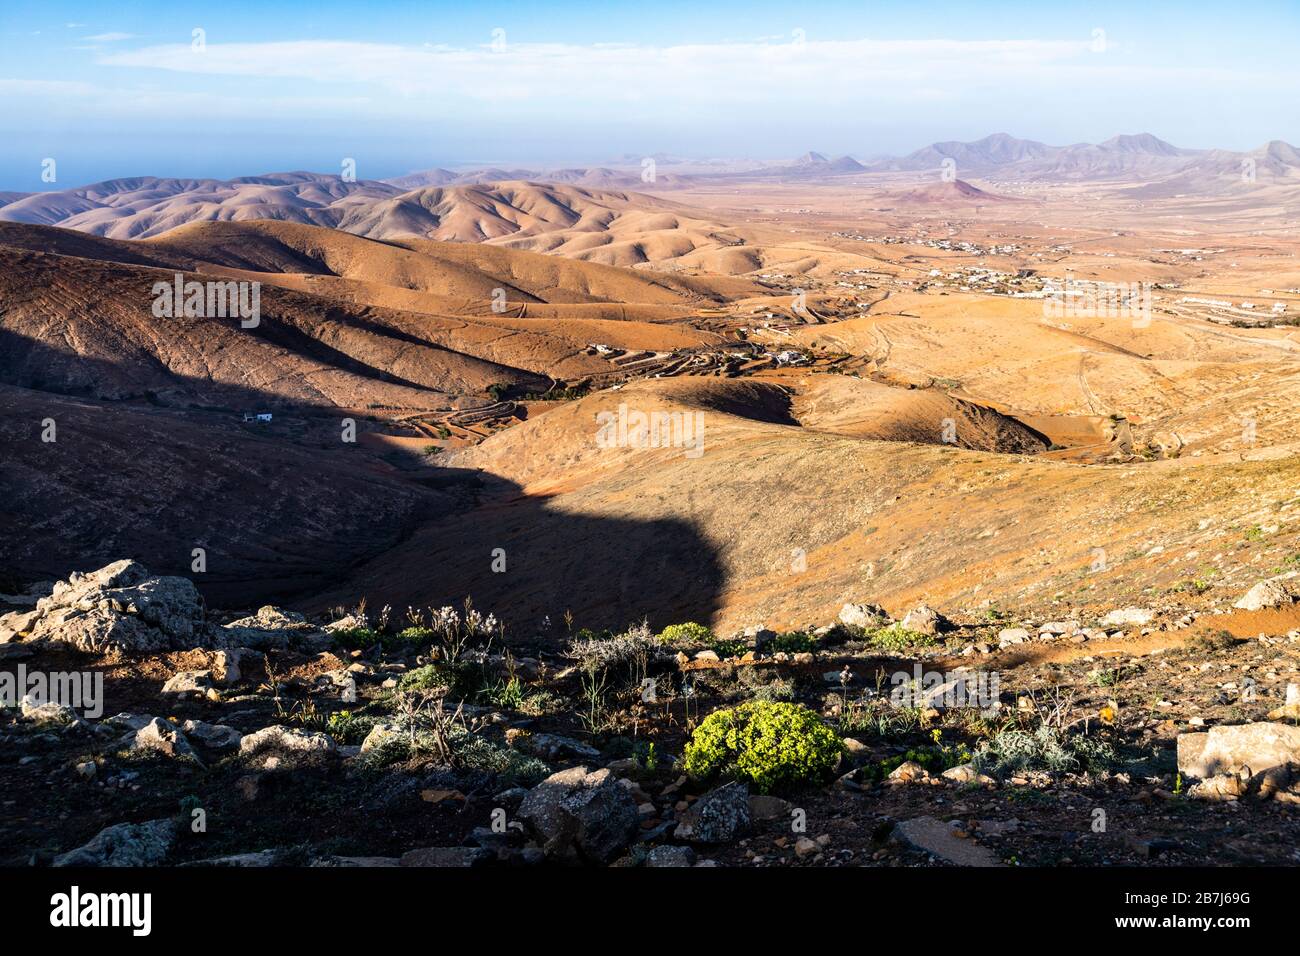 The view over a dry, barren landscape from Mirador de Guise y Ayose in the centre of the Canary Island of Fuerteventura Stock Photo